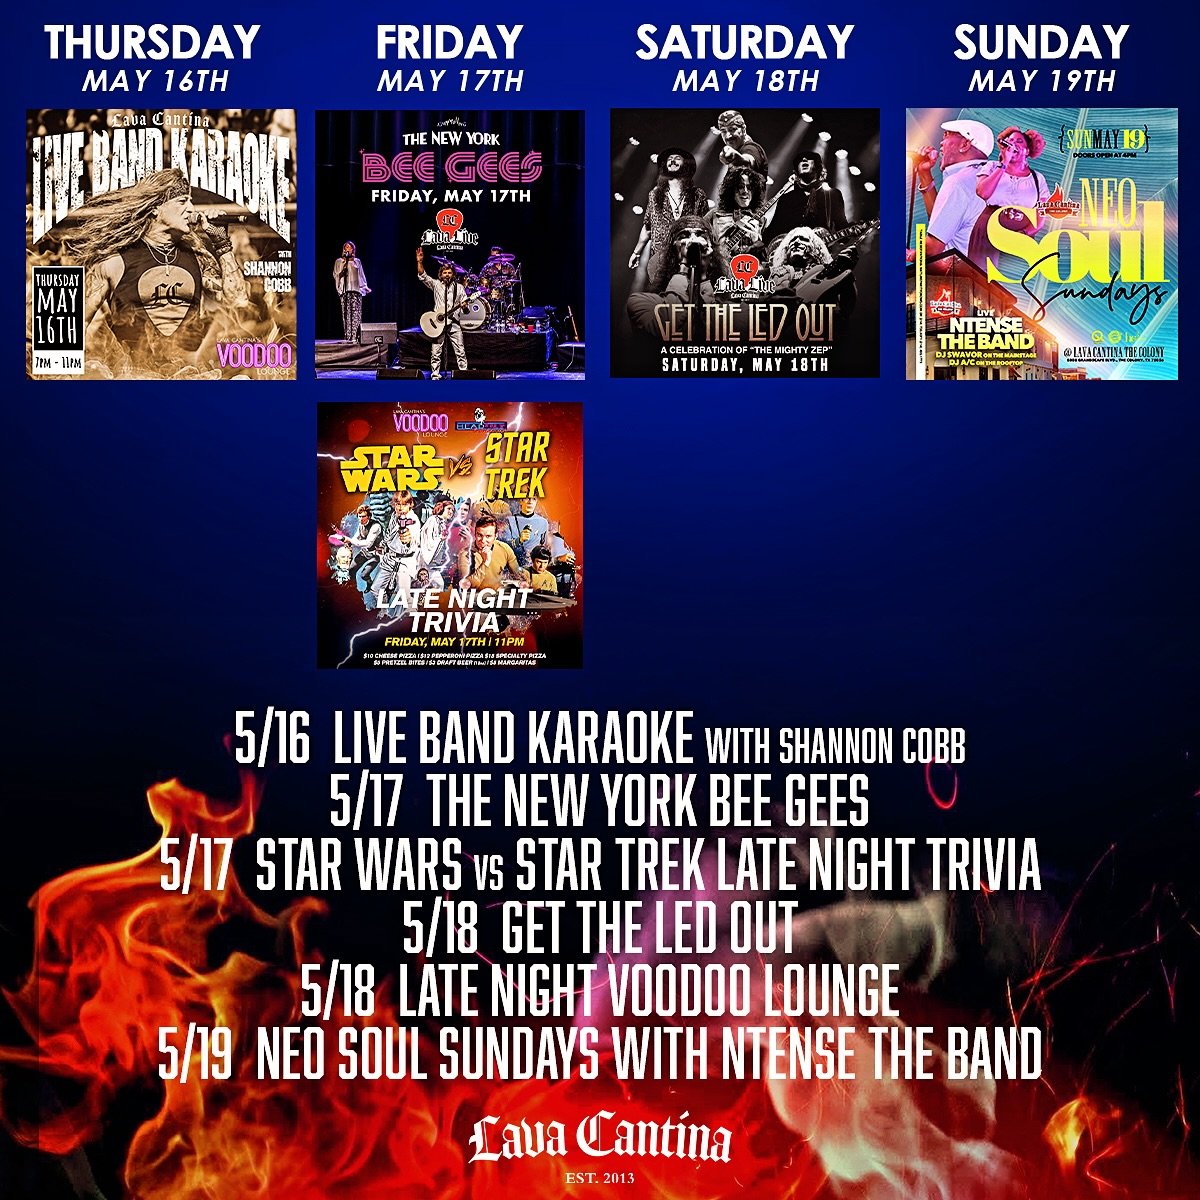 🚨 THIS WEEK @lavacantinatc 🚨

🎟️➡️ LavaCantina.com ⬅️🎟️

Thursday, May 16th
LIVE BAND KARAOKE 
with SHANNON COBB
💀Lava Cantina&rsquo;s Voodoo Lounge
7 PM - 11 PM
AGES: All Ages!

Friday, May 17th
THE NEW YORK BEE GEES
🔥Lava Live at Lava Cantina